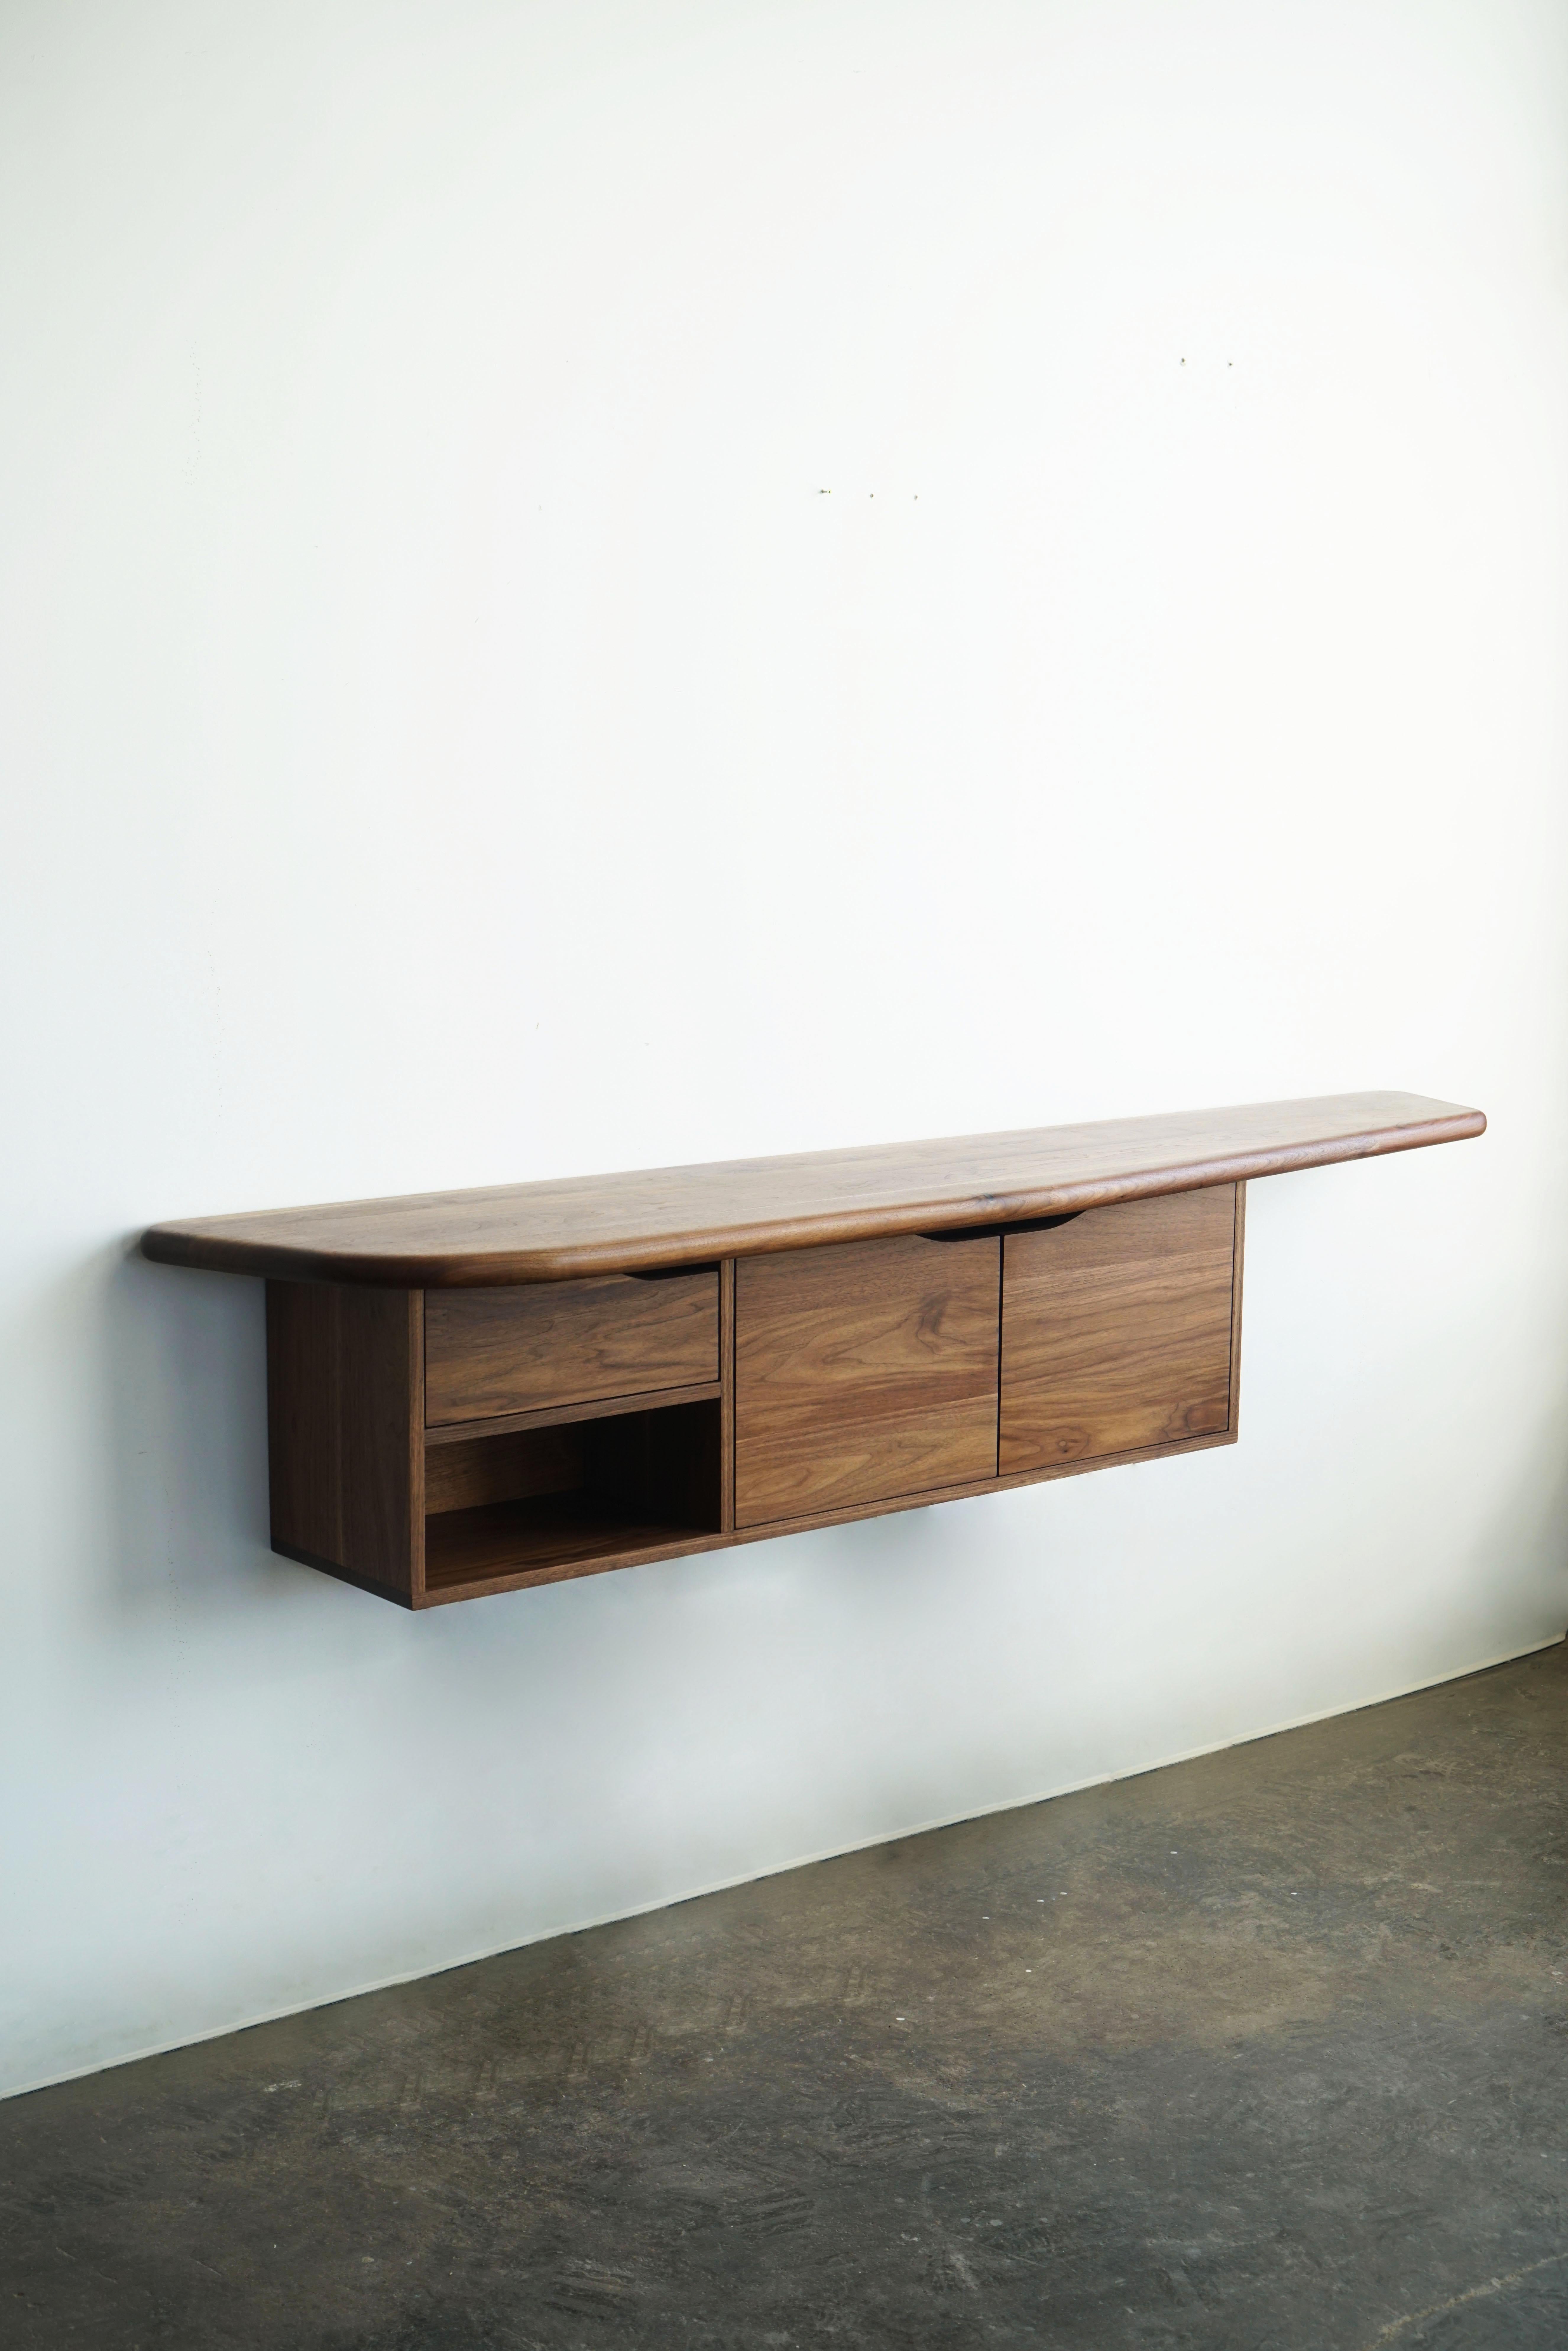 Organic Shaped Modern wall unit by Last Workshop, 2023.
Shown here in a solid walnut, natural finish.
96